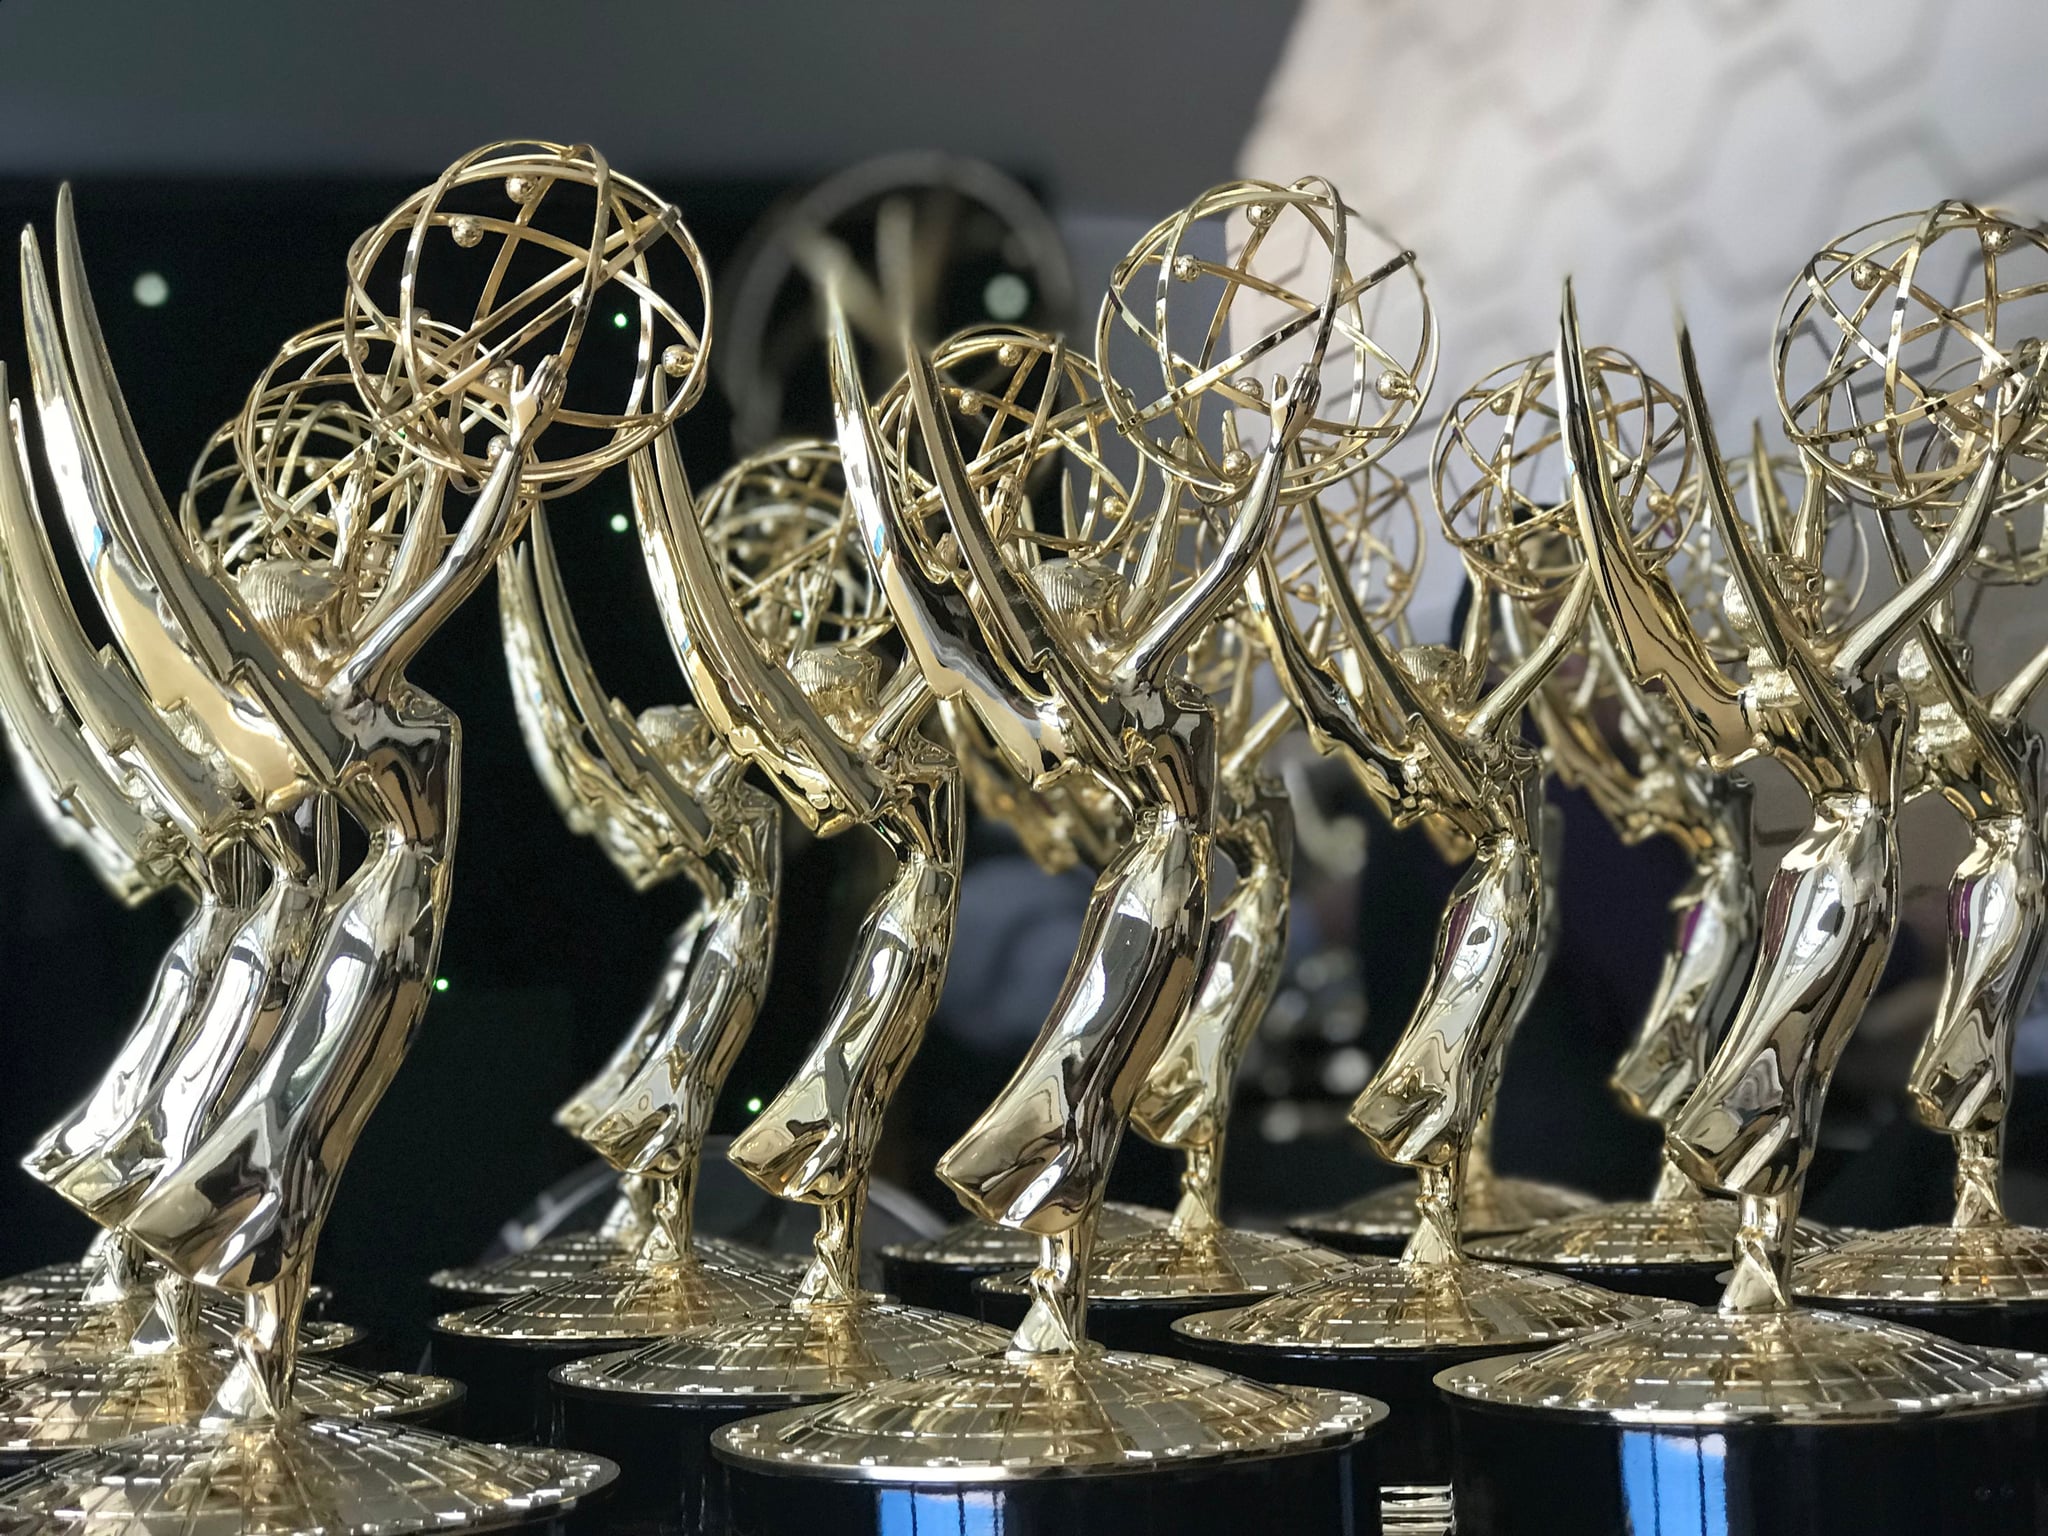 From Zendaya to the Cast of Schitts Creek, This is the Full List of 2020 Emmy Award Winners